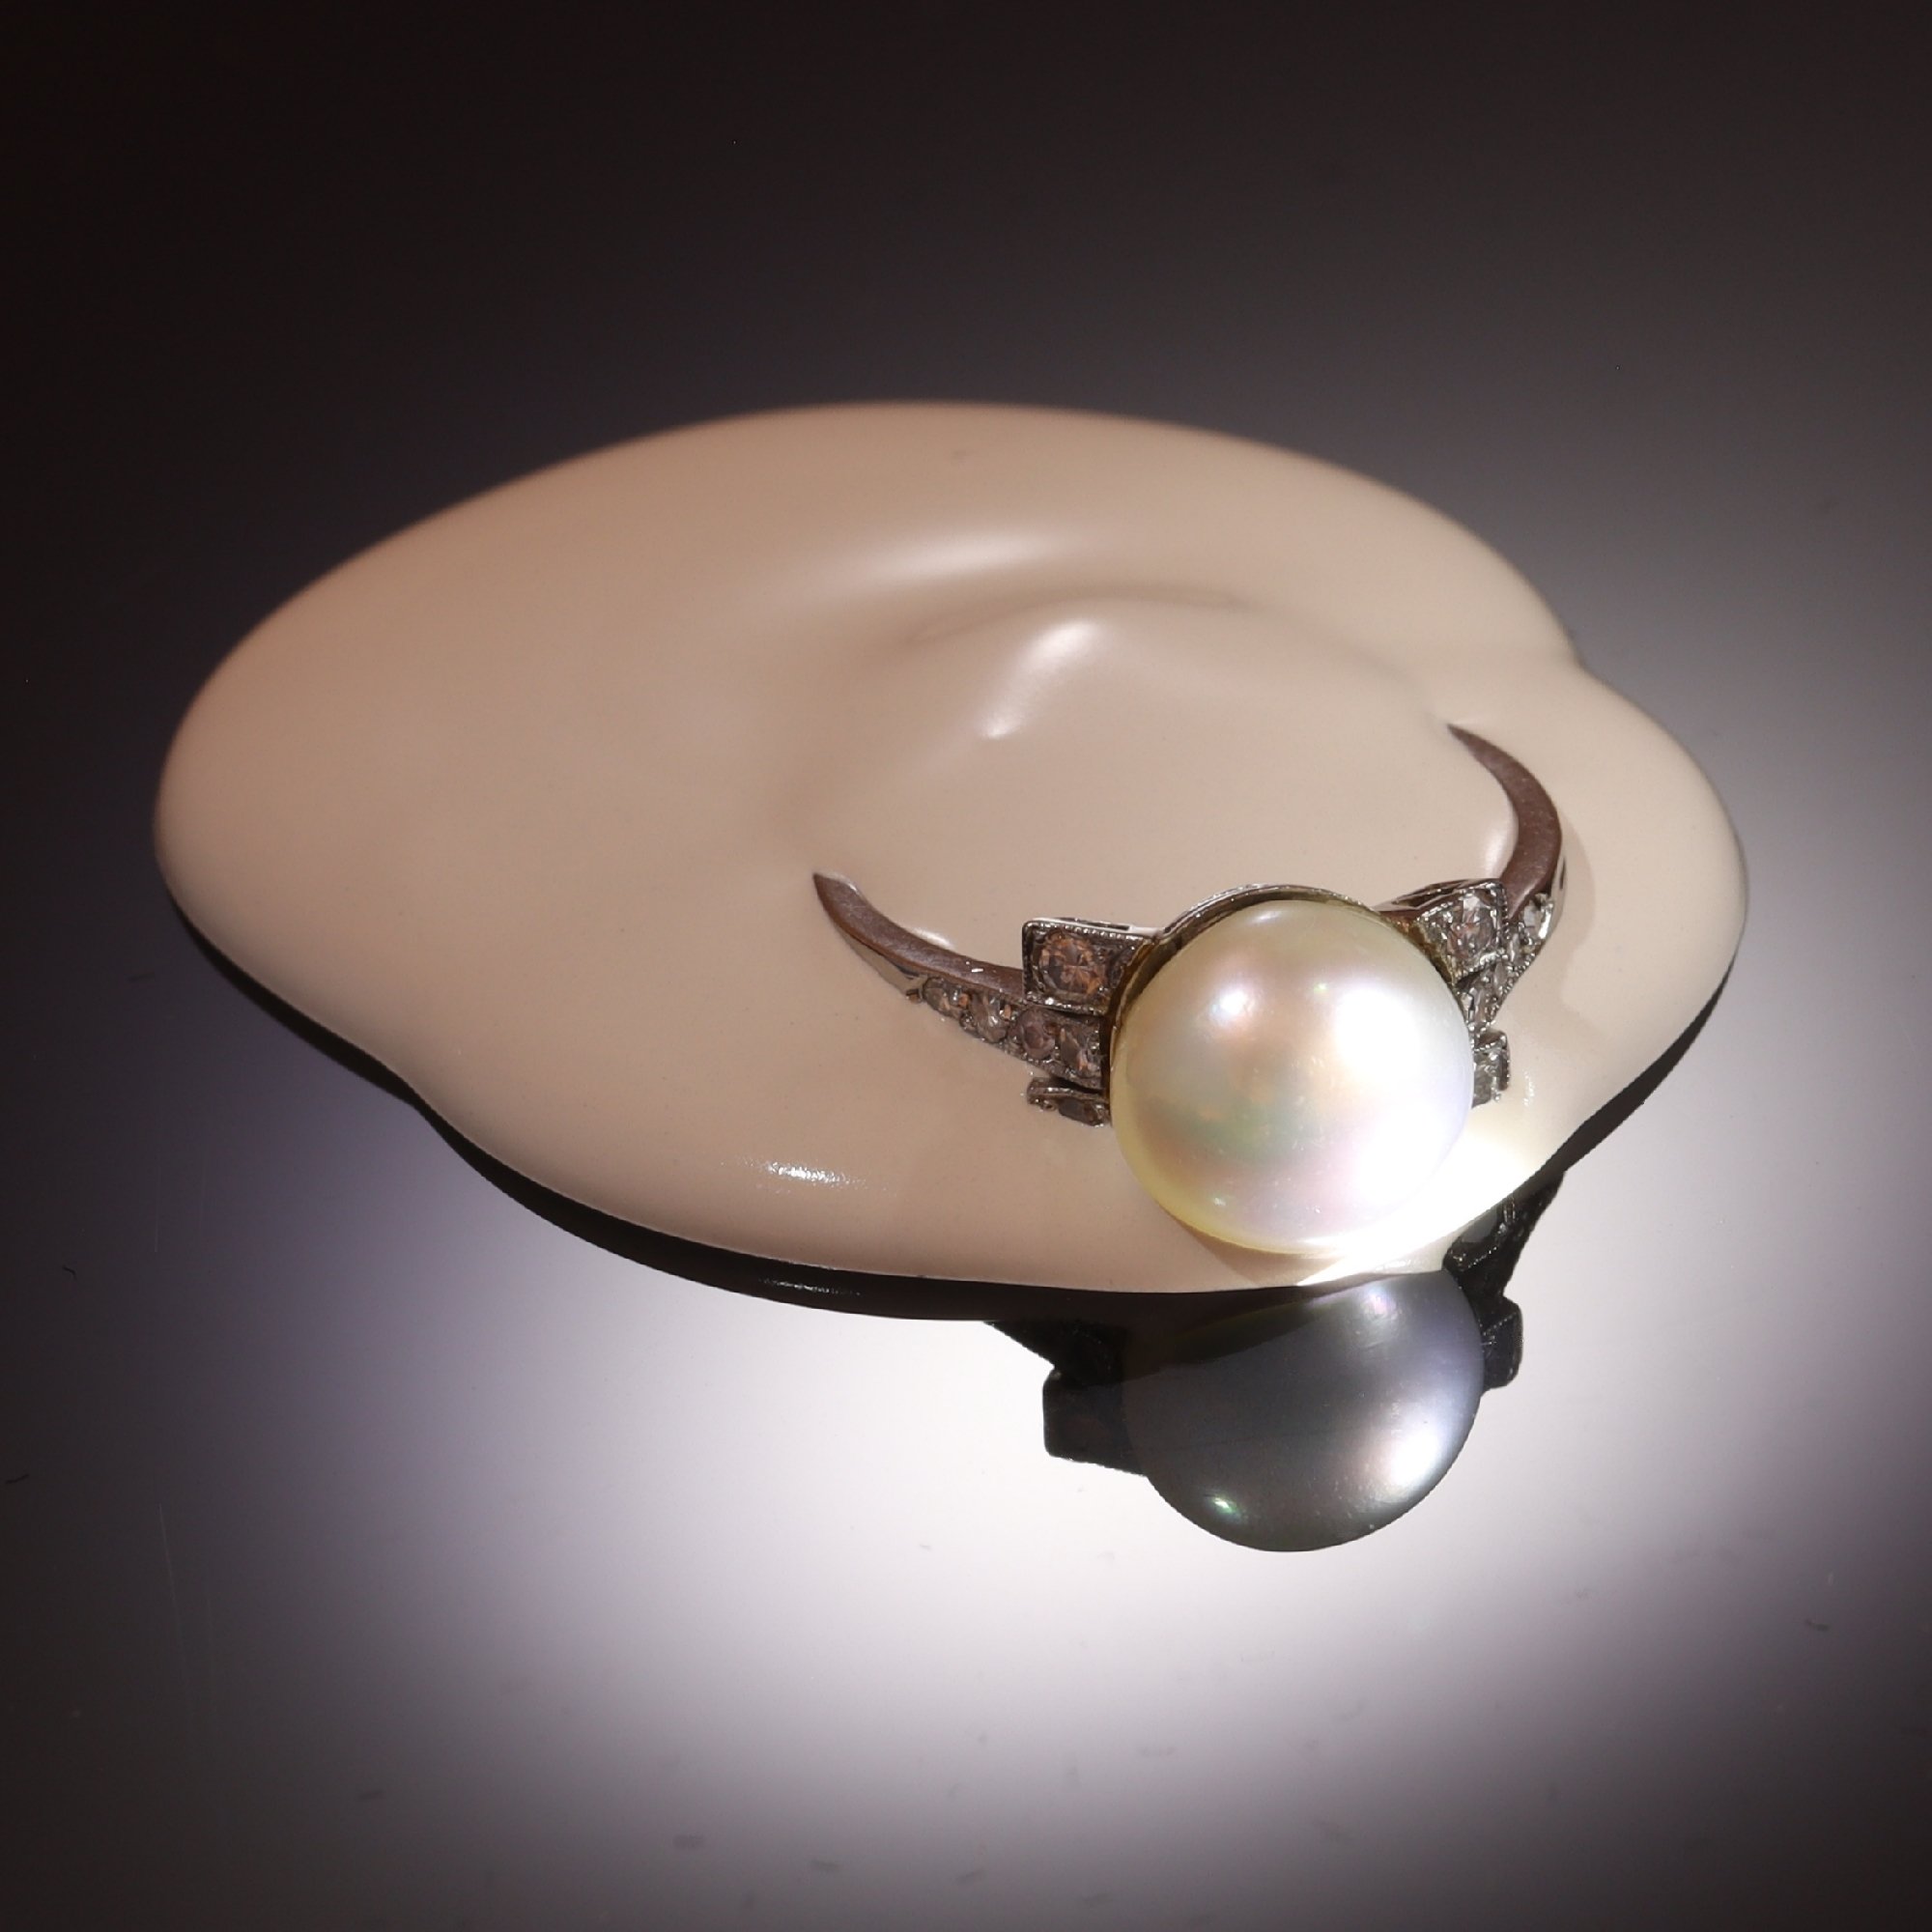 Click the picture to find out more about this vintage Art Deco ring with large pearl and diamonds